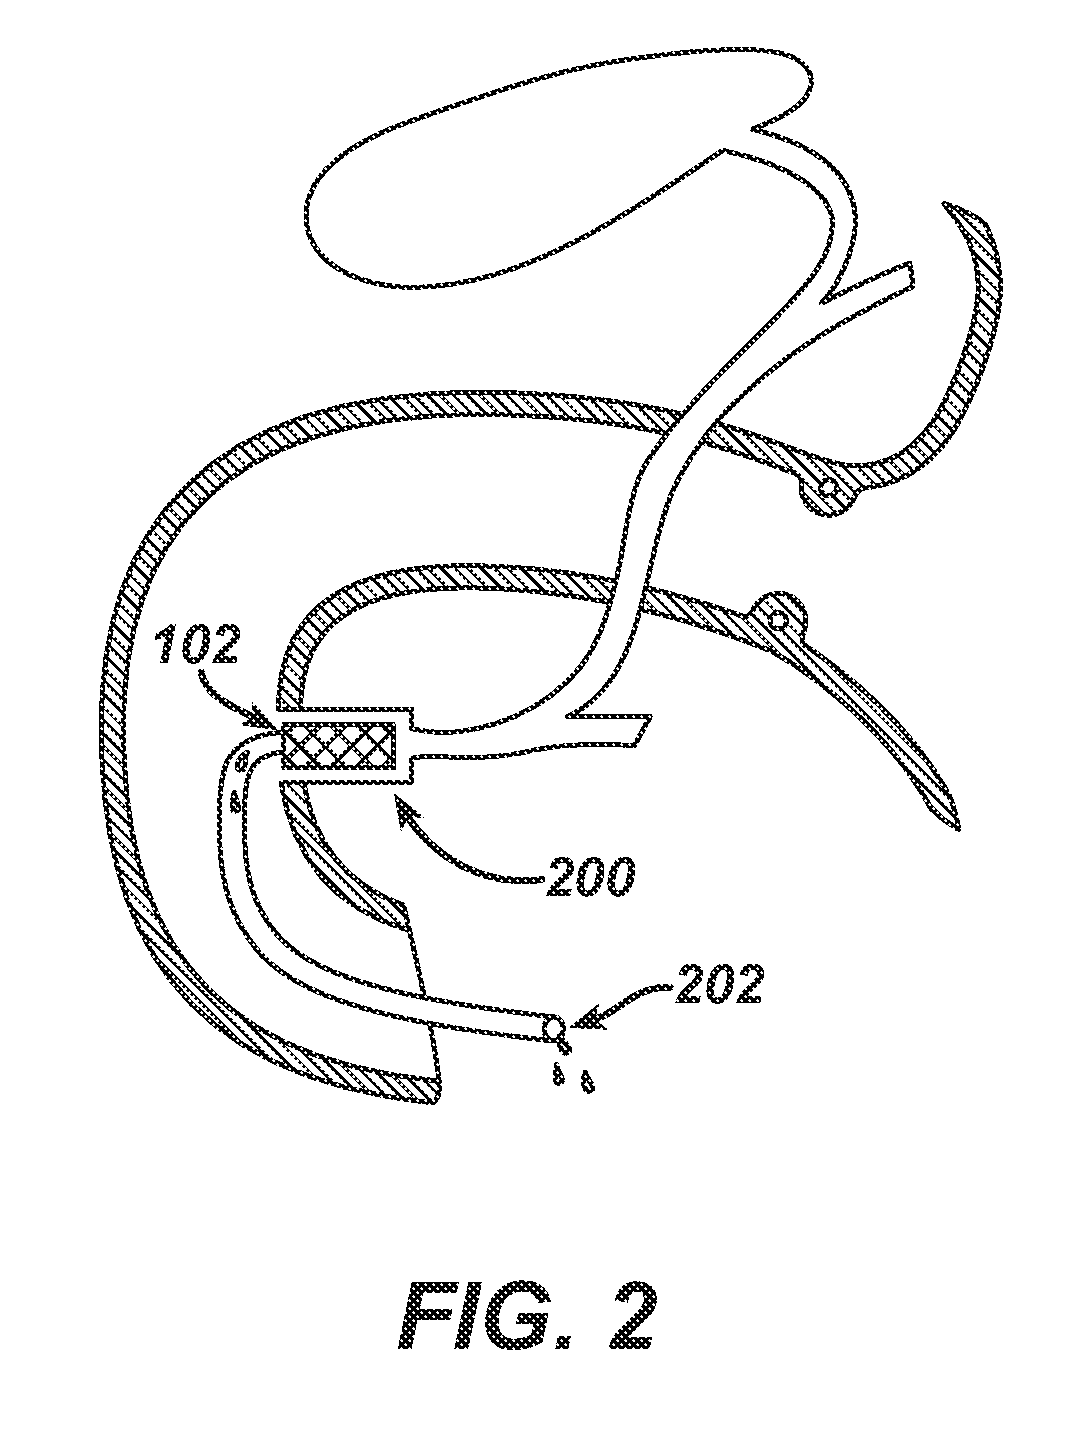 Catheter For Deactivating At Least A Portion of the Digestive Enzymes In An Amount Of Bile